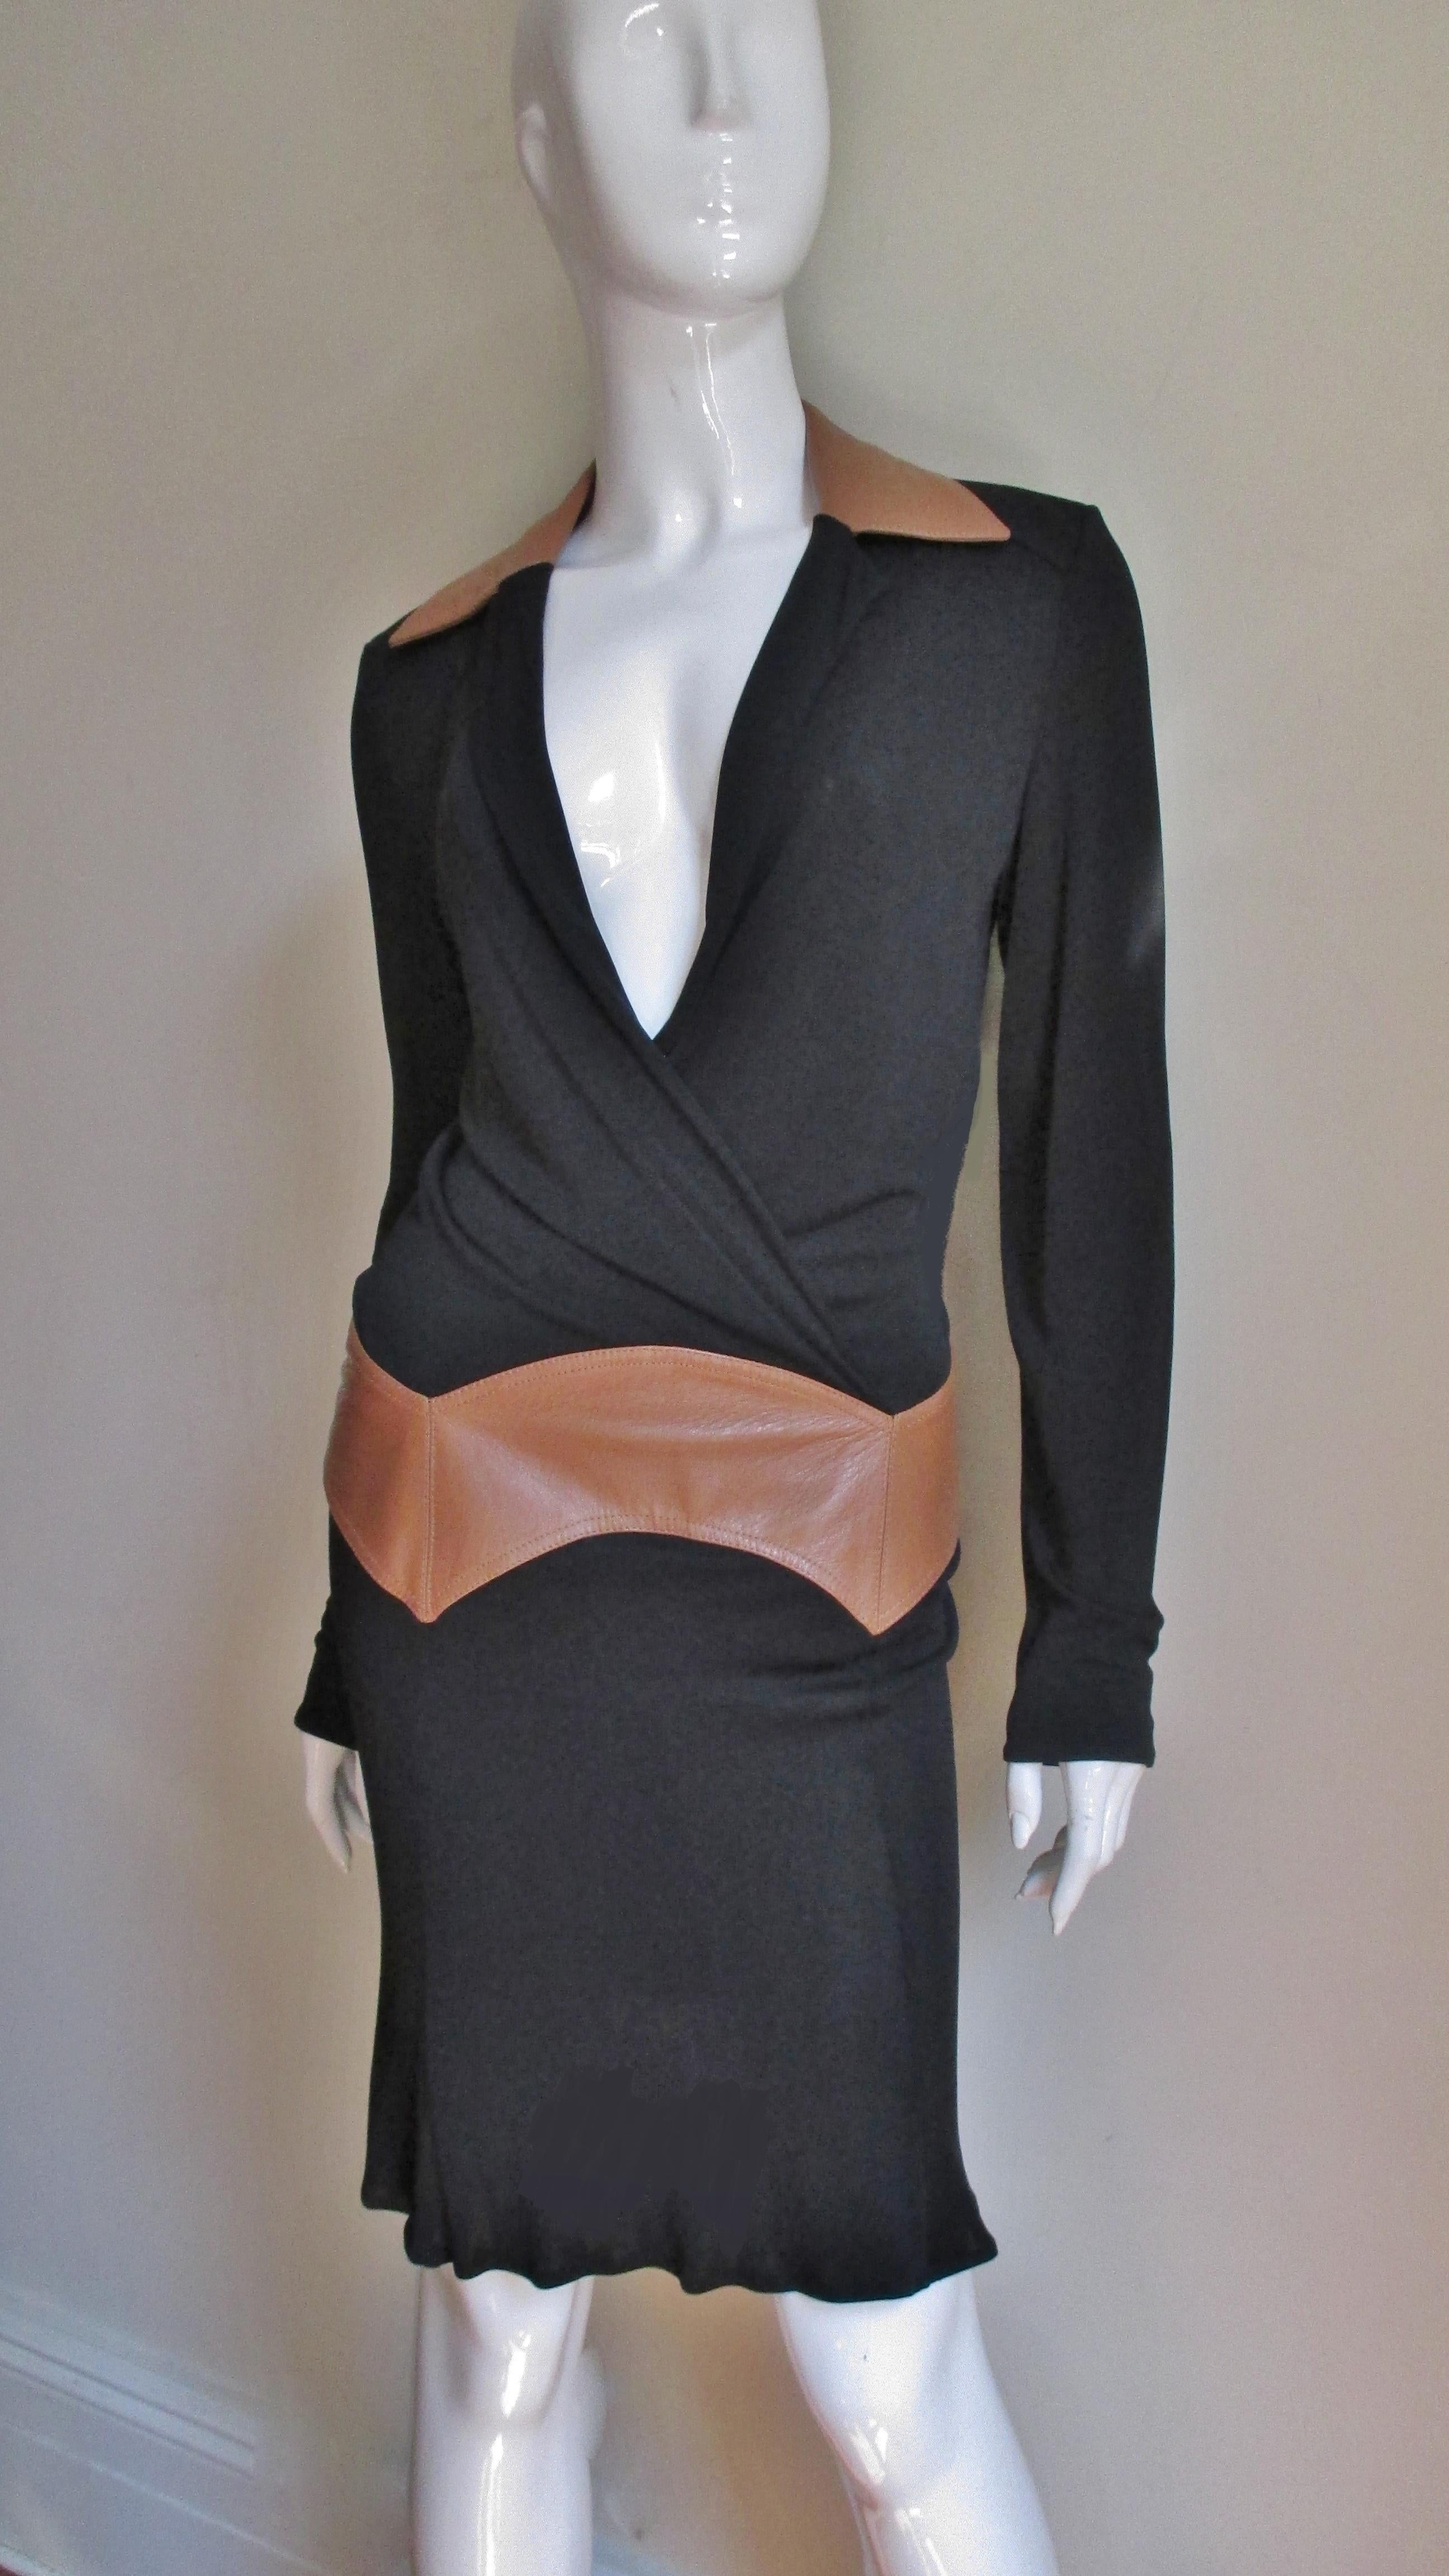 A fabulous black silk jersey dress from Gianni Versace Couture. The long sleeve bodice crosses in the front creating an adjustable neckline. It has a tan colored leather inset around the hips which narrows at the back and a matching leather collar.